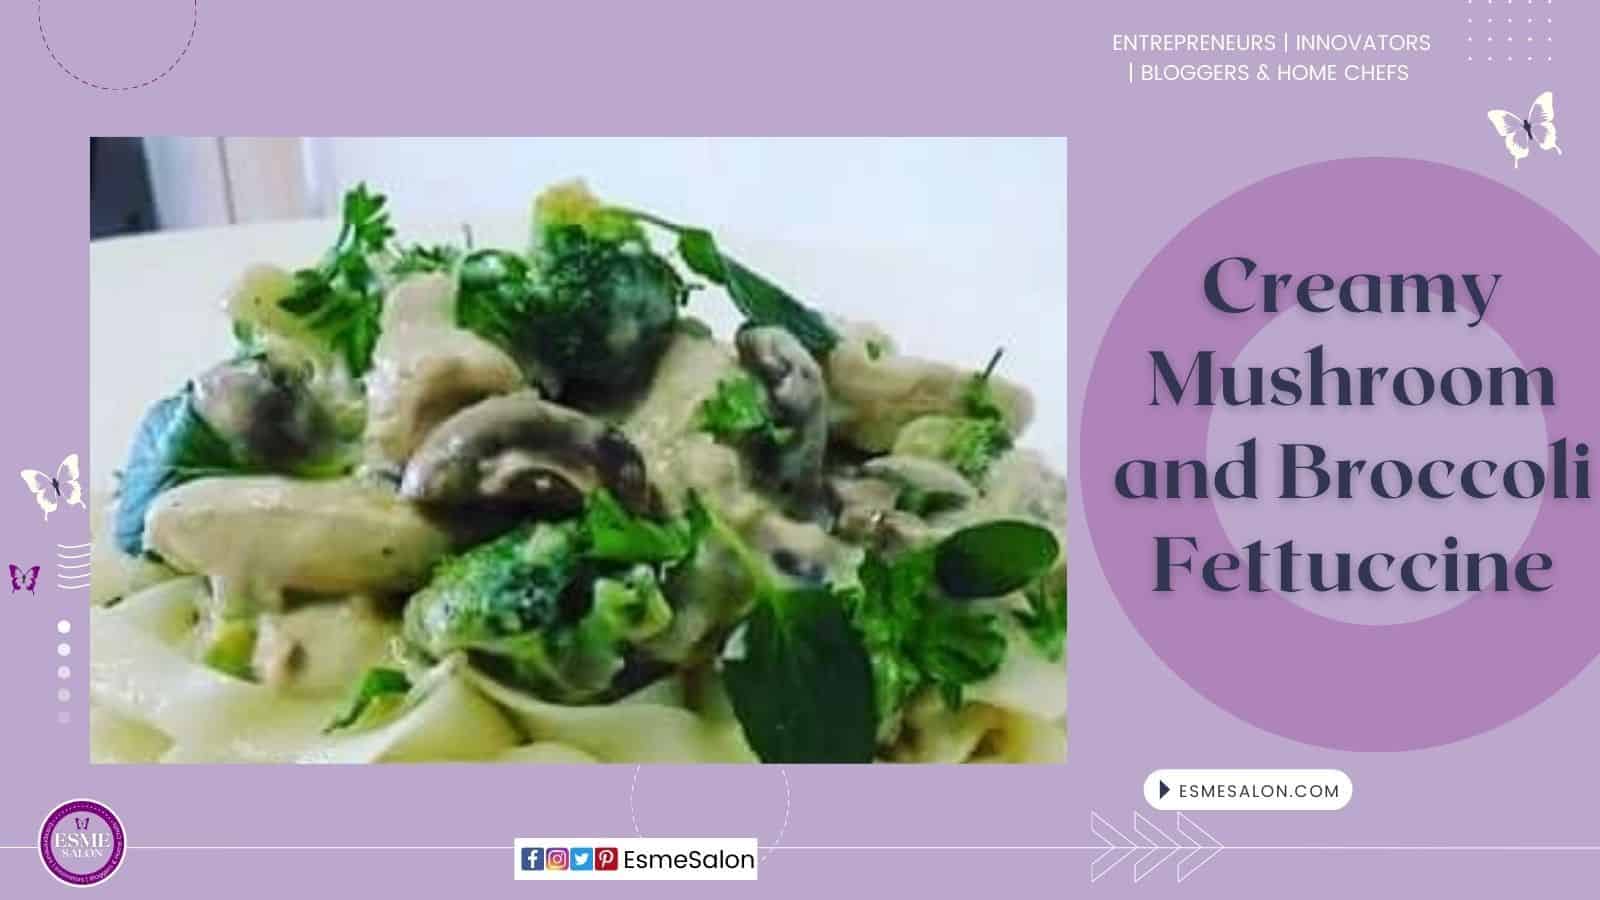 an image of a bowl filled with Creamy Mushroom and Broccoli Fettuccine